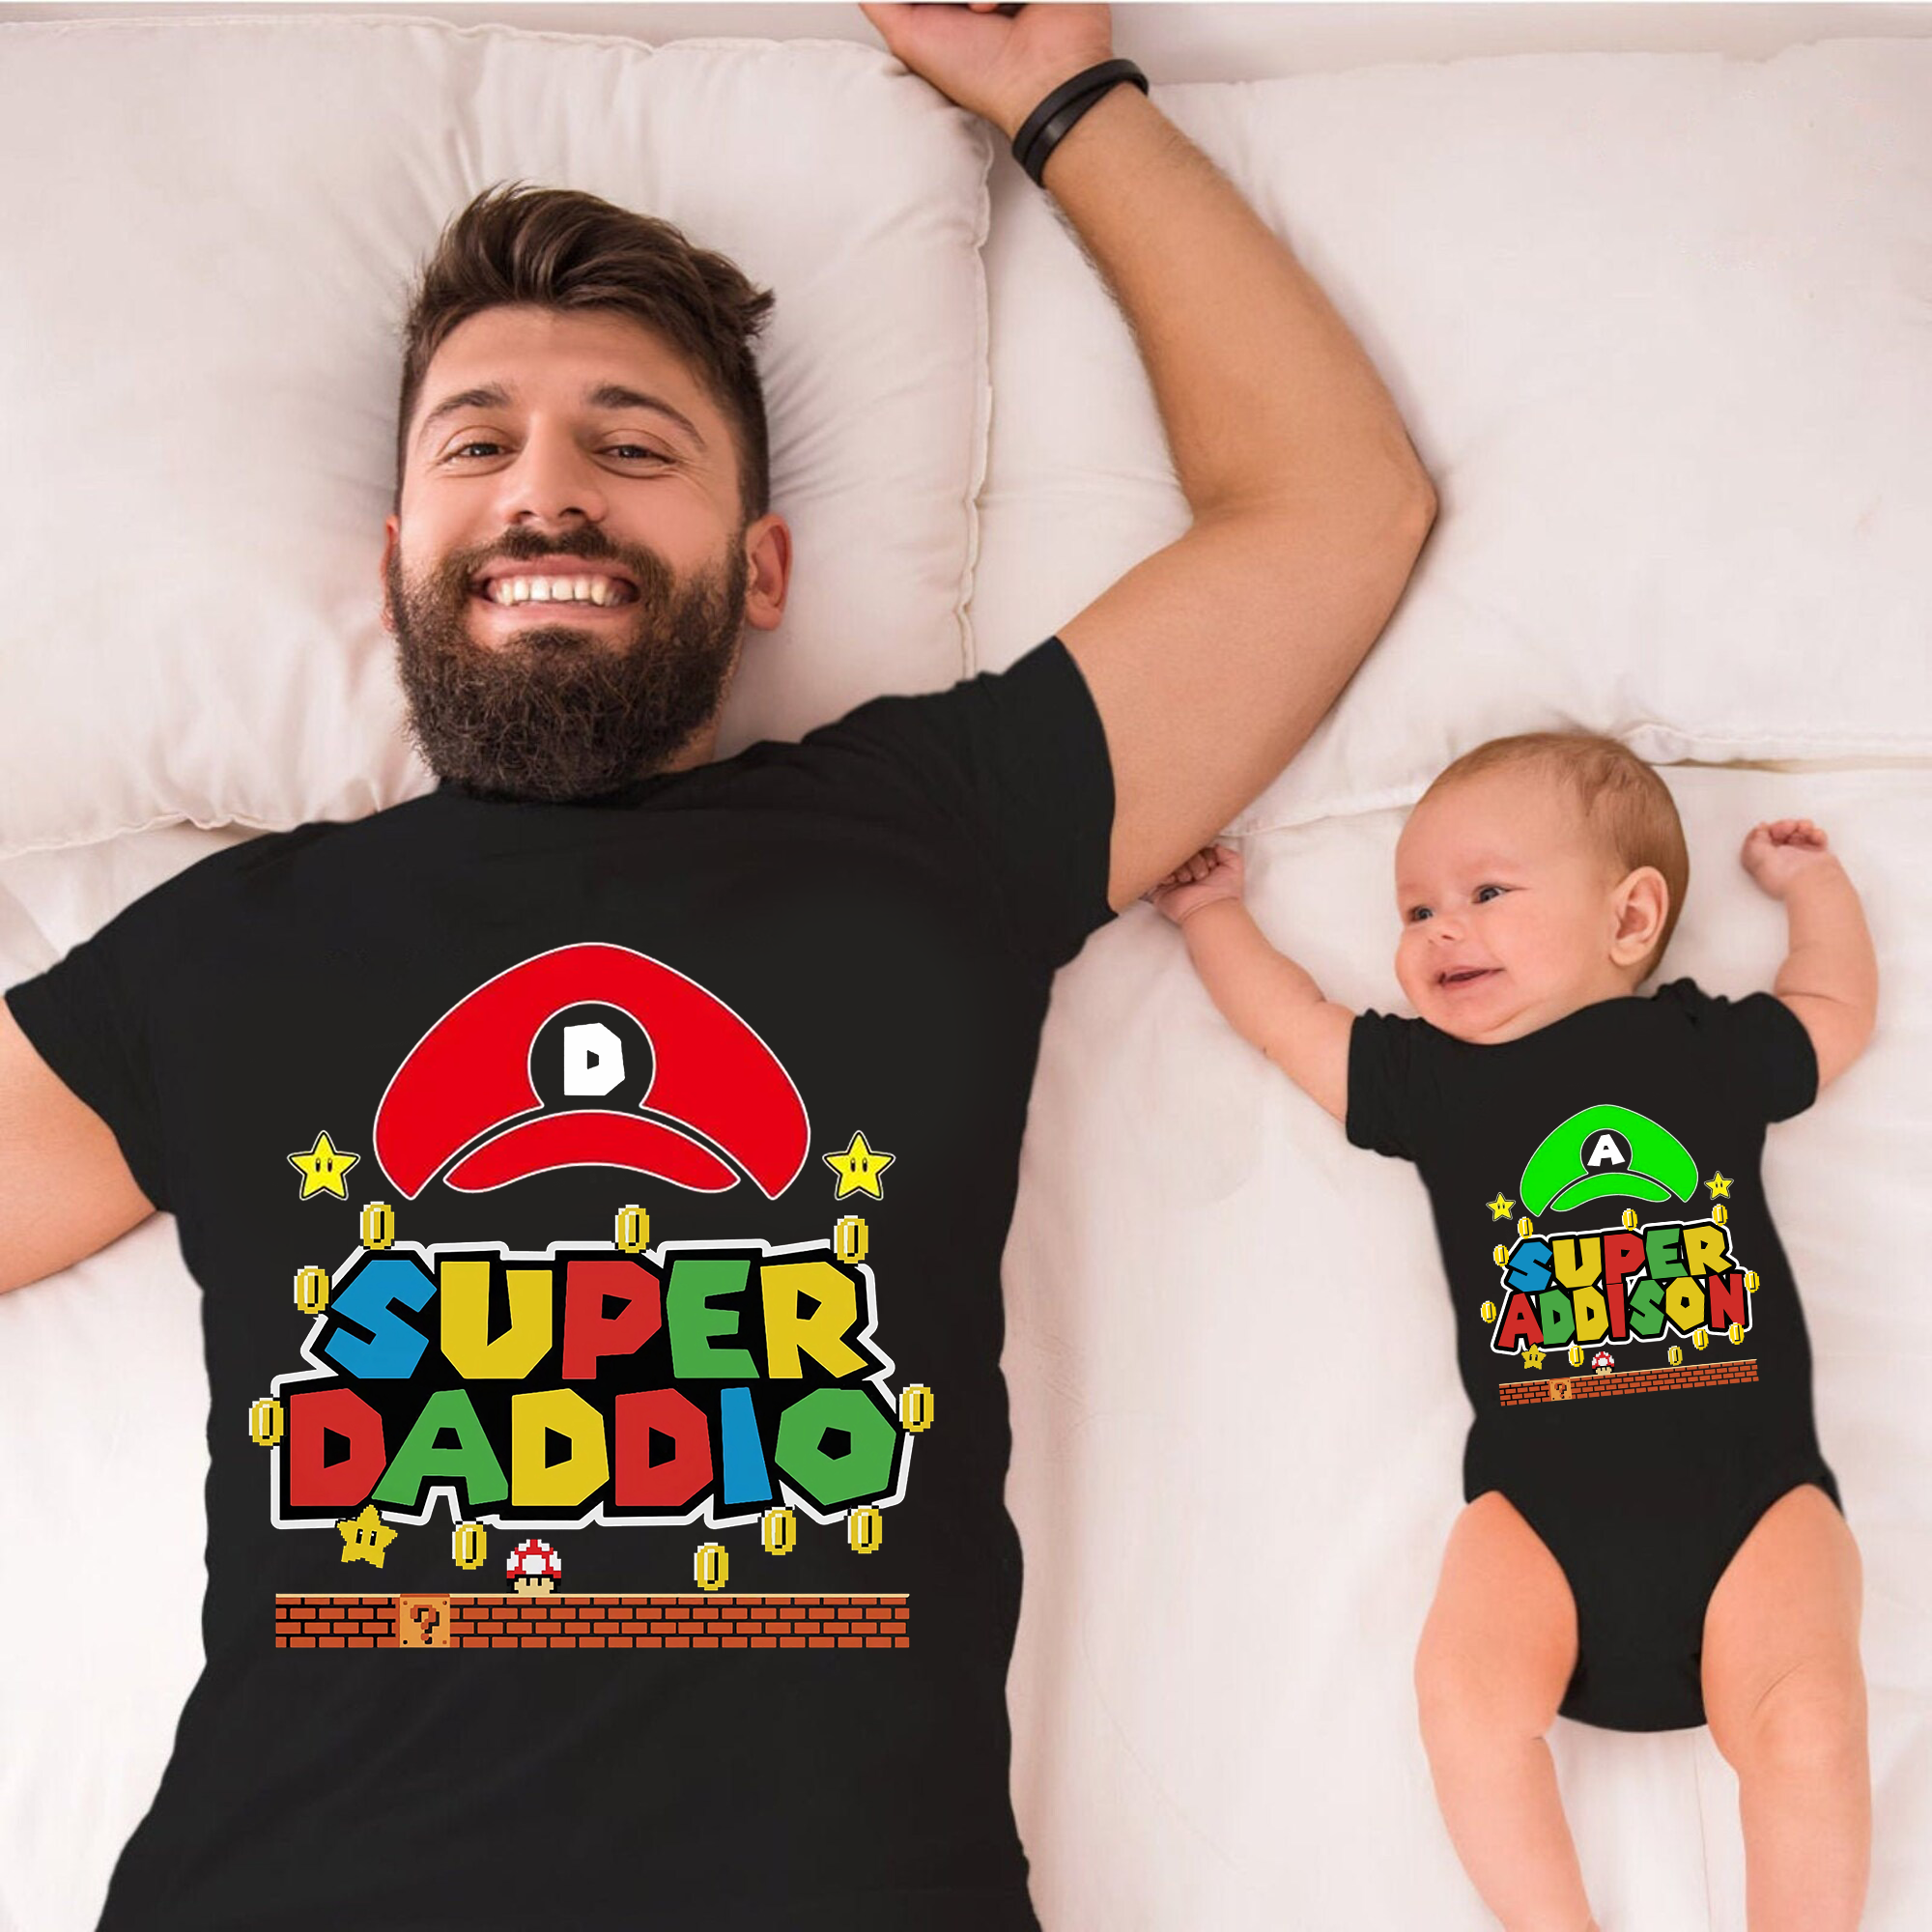 Super Mario Dad and Son Shirt, Dad and Baby Matching Shirt, Father and Son Matching Shirts